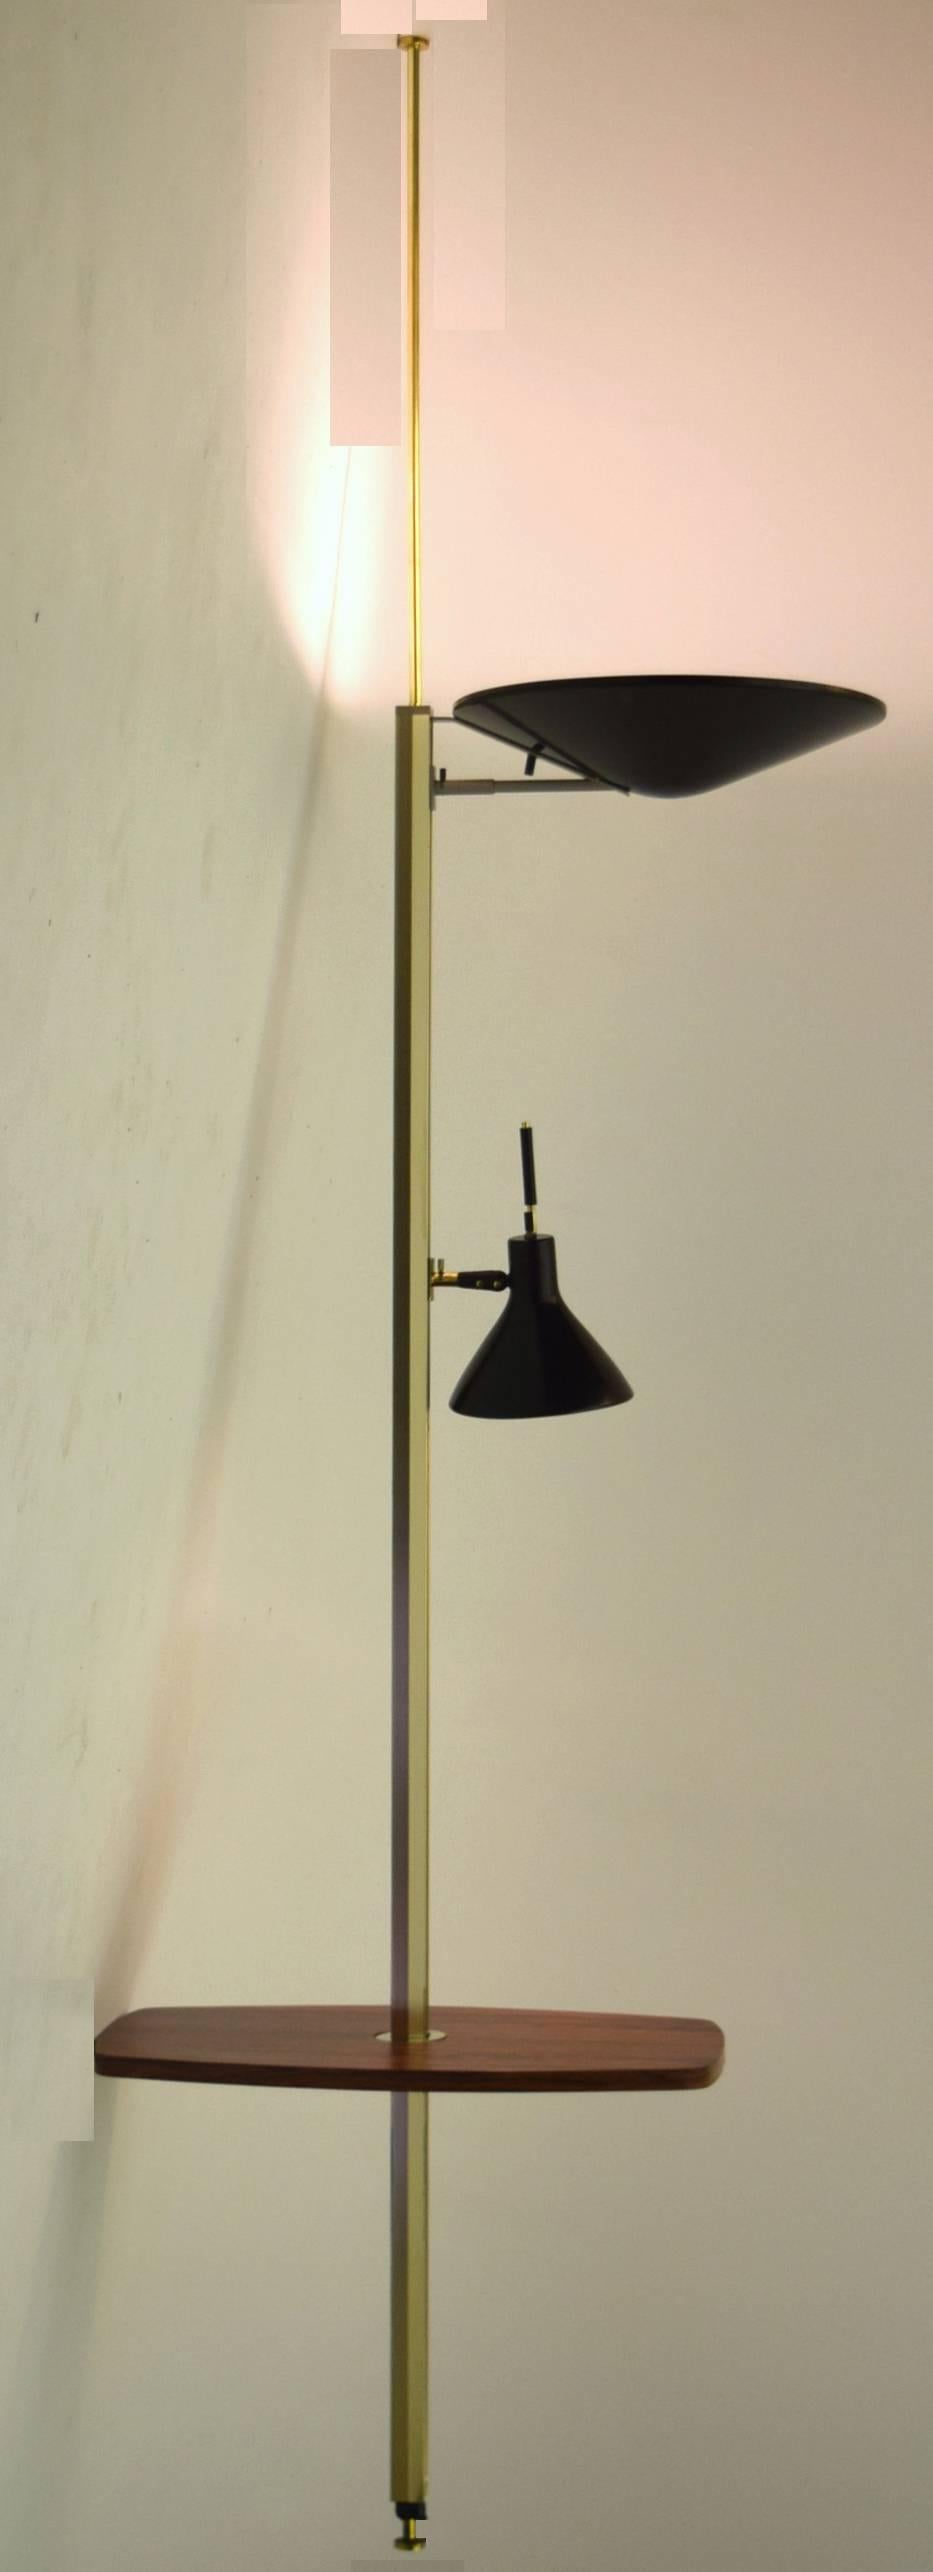 Ligtholier's solution to the fickle customer a lamp stem that can have lamps added as needed on either side coupled with adjustable height and lamp table height, the lytespan tension pole.

Additional lamps are available, please ask.

Measures